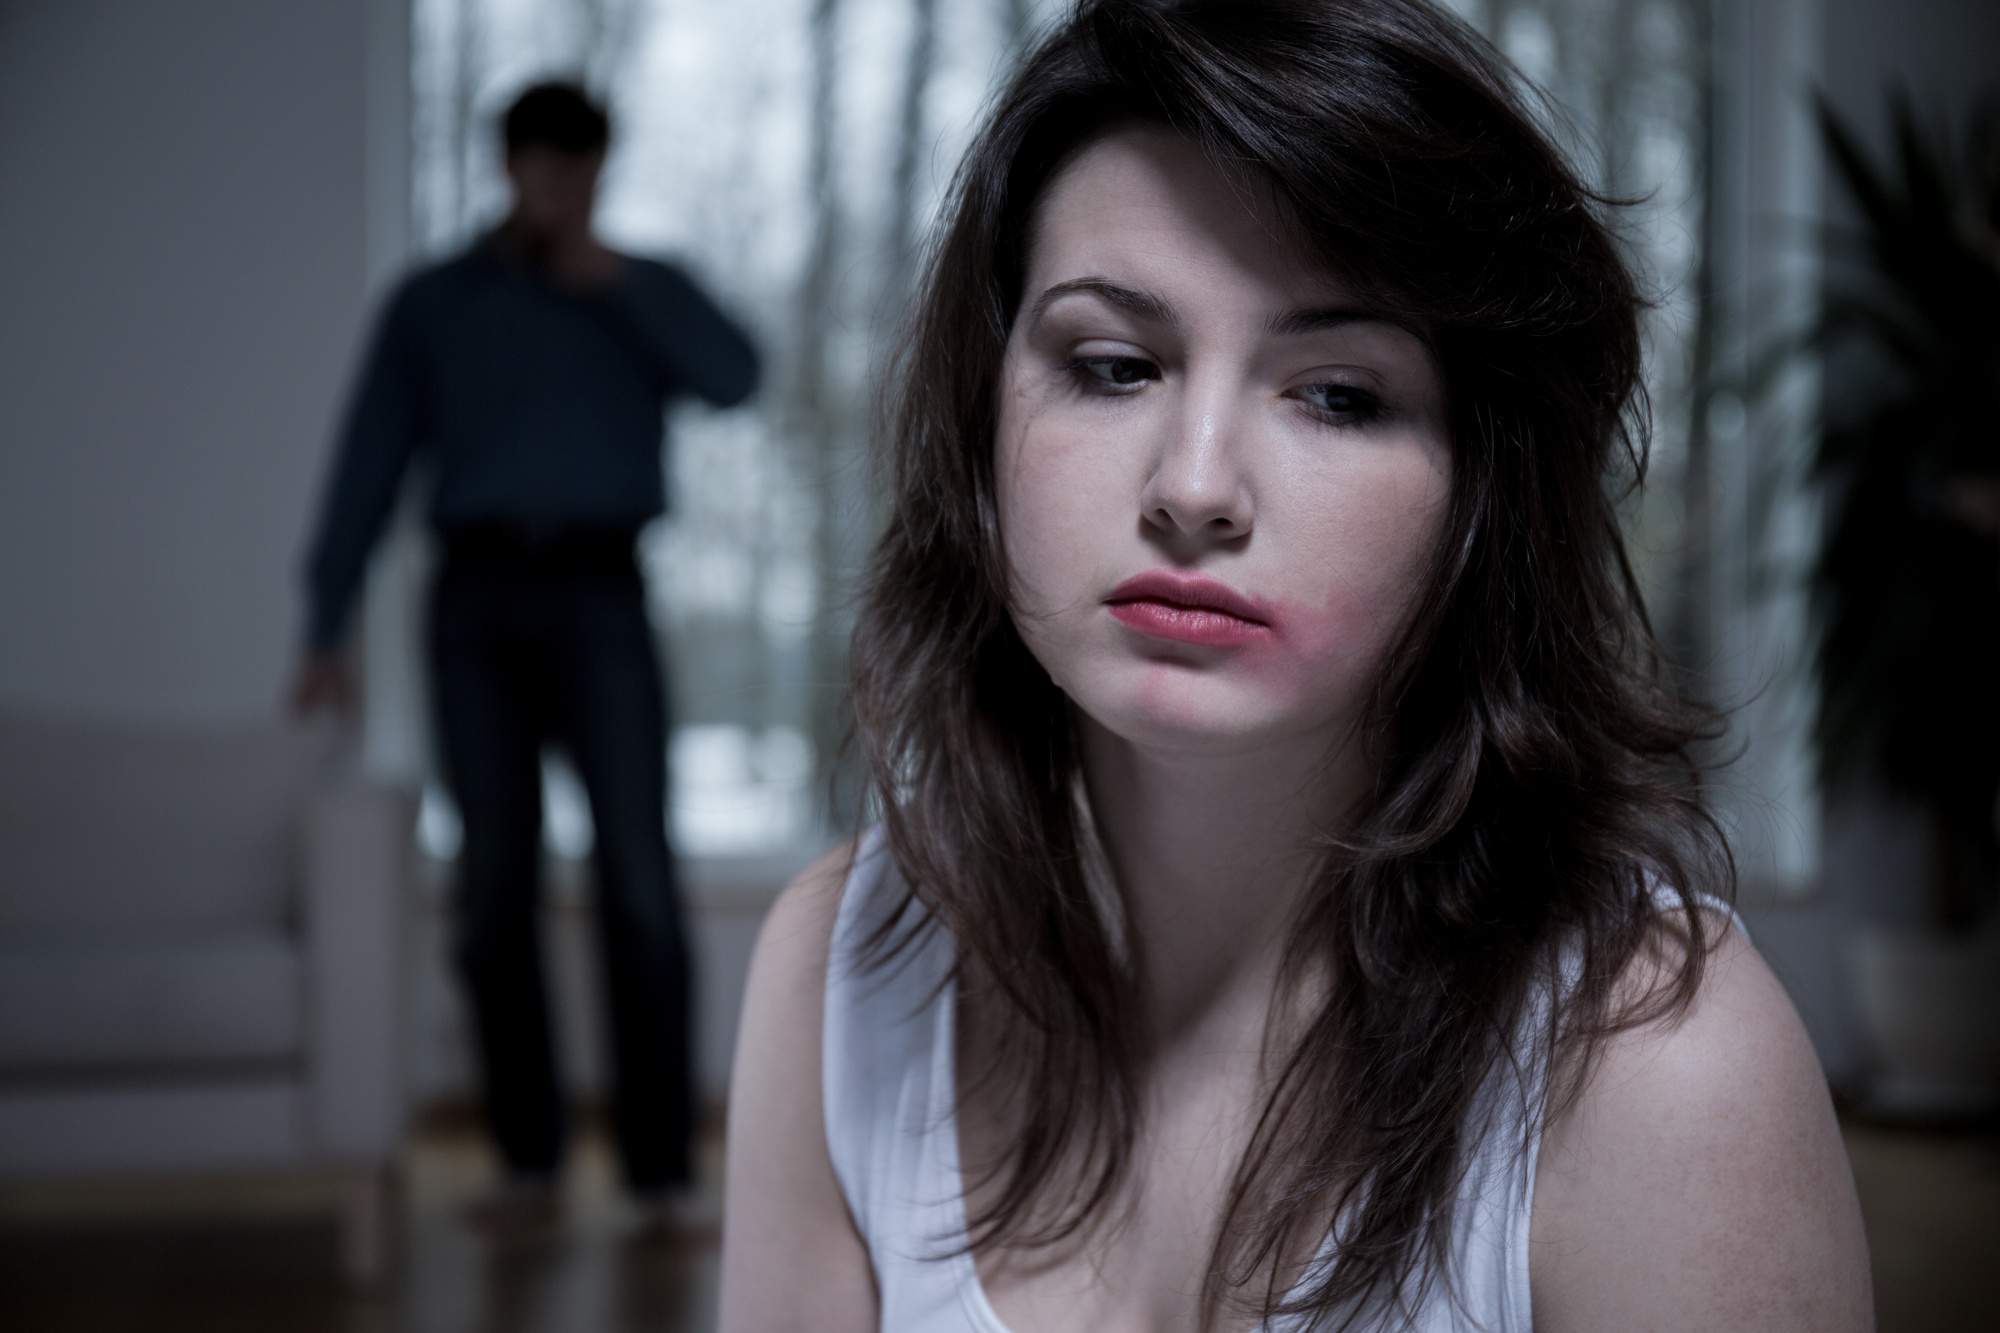 The Early Warning Signs of an Abusive Relationship